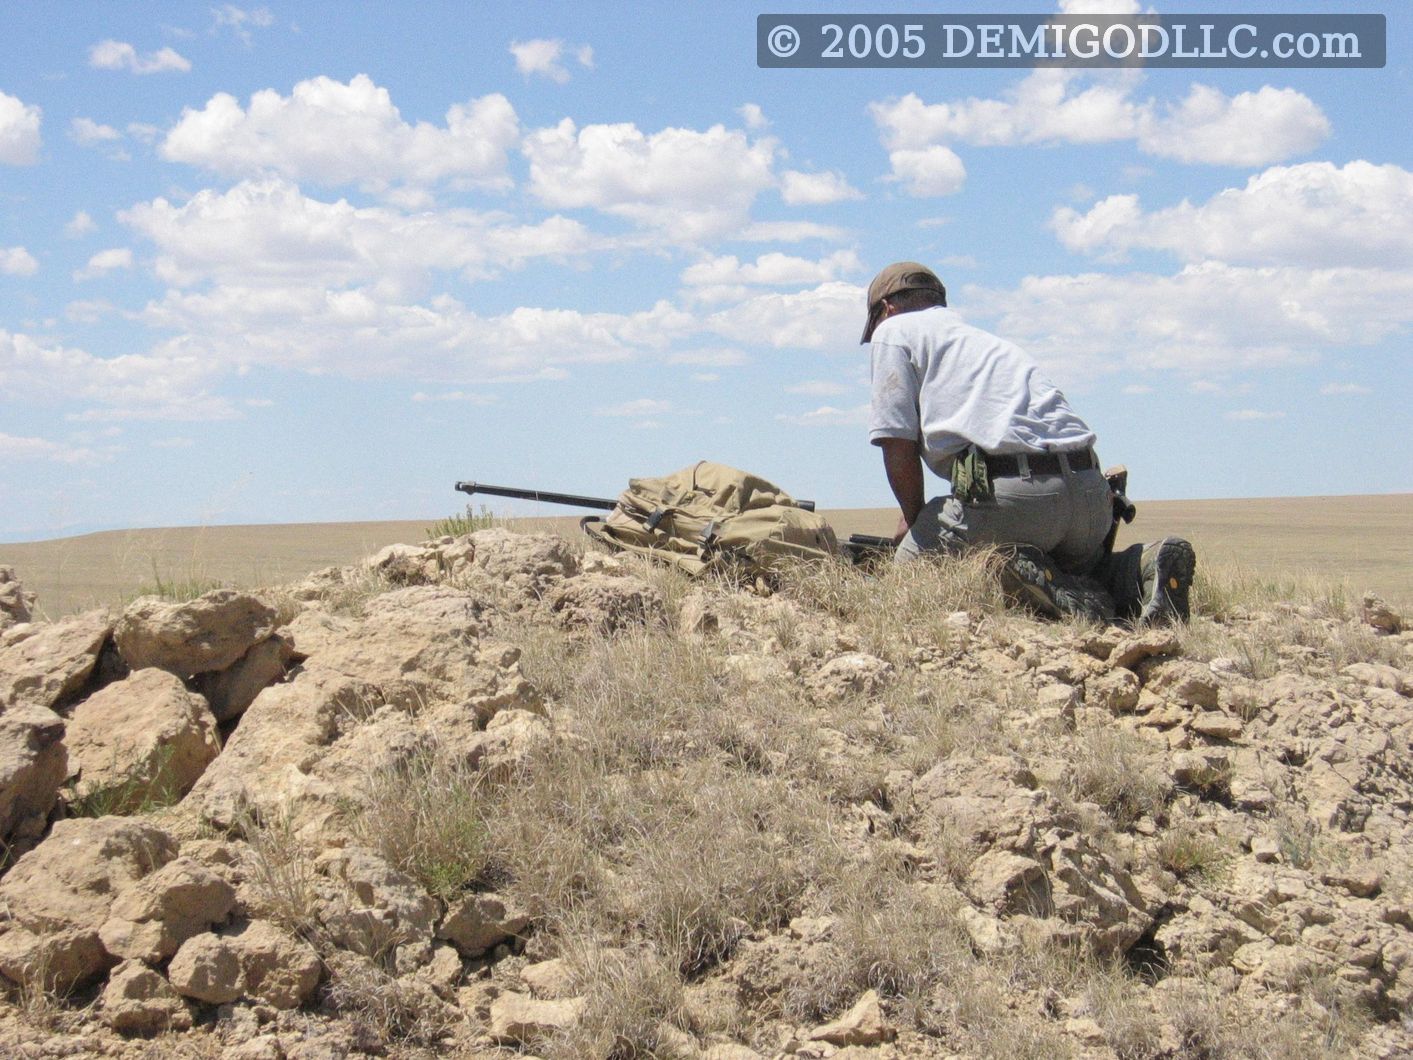 Shooting at the Pinnacles, August 2005
, photo 